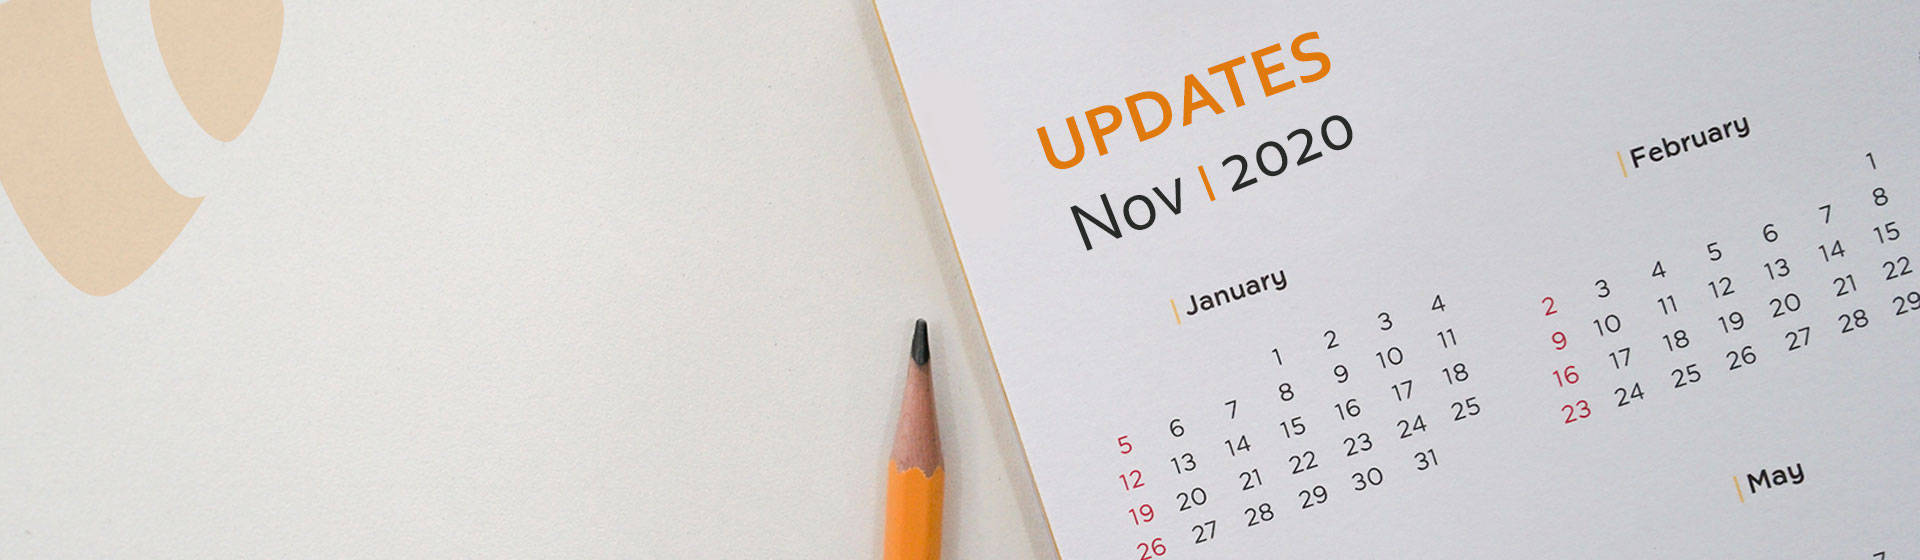 TYPO3 Templates & Extensions Updates Release - November 2020